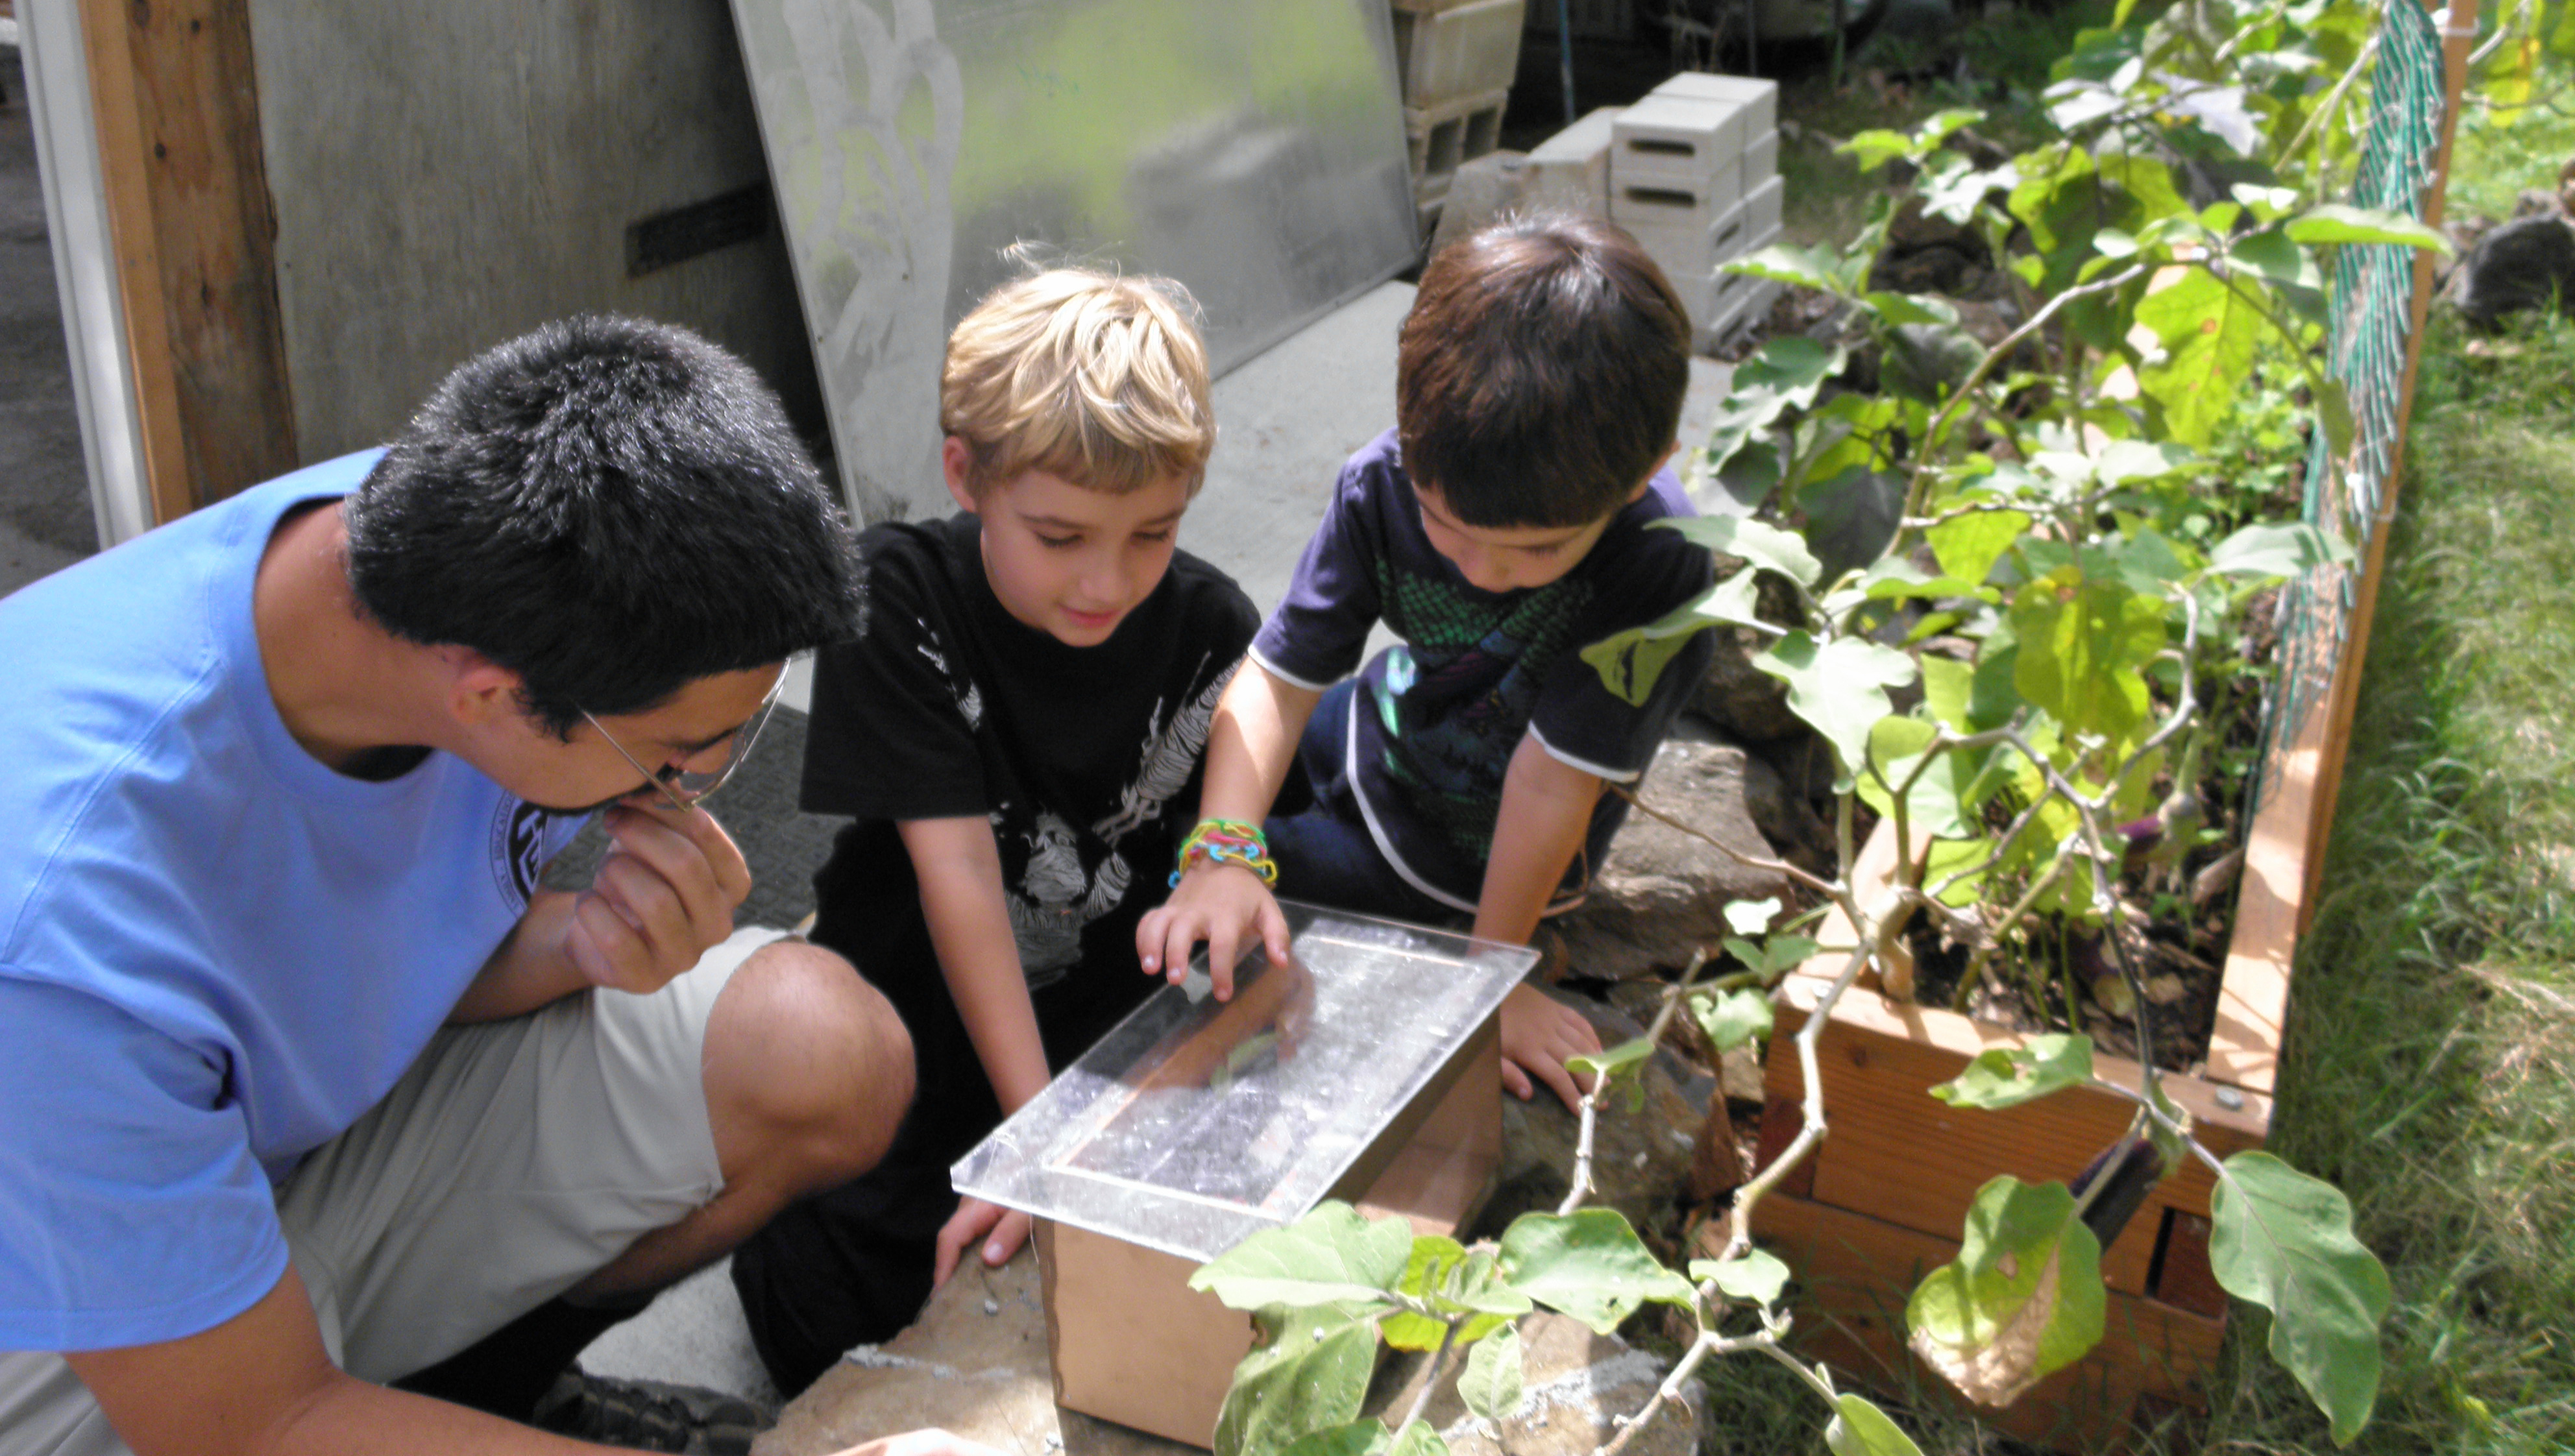 Two young boys and a college student examining a plant from a garden.